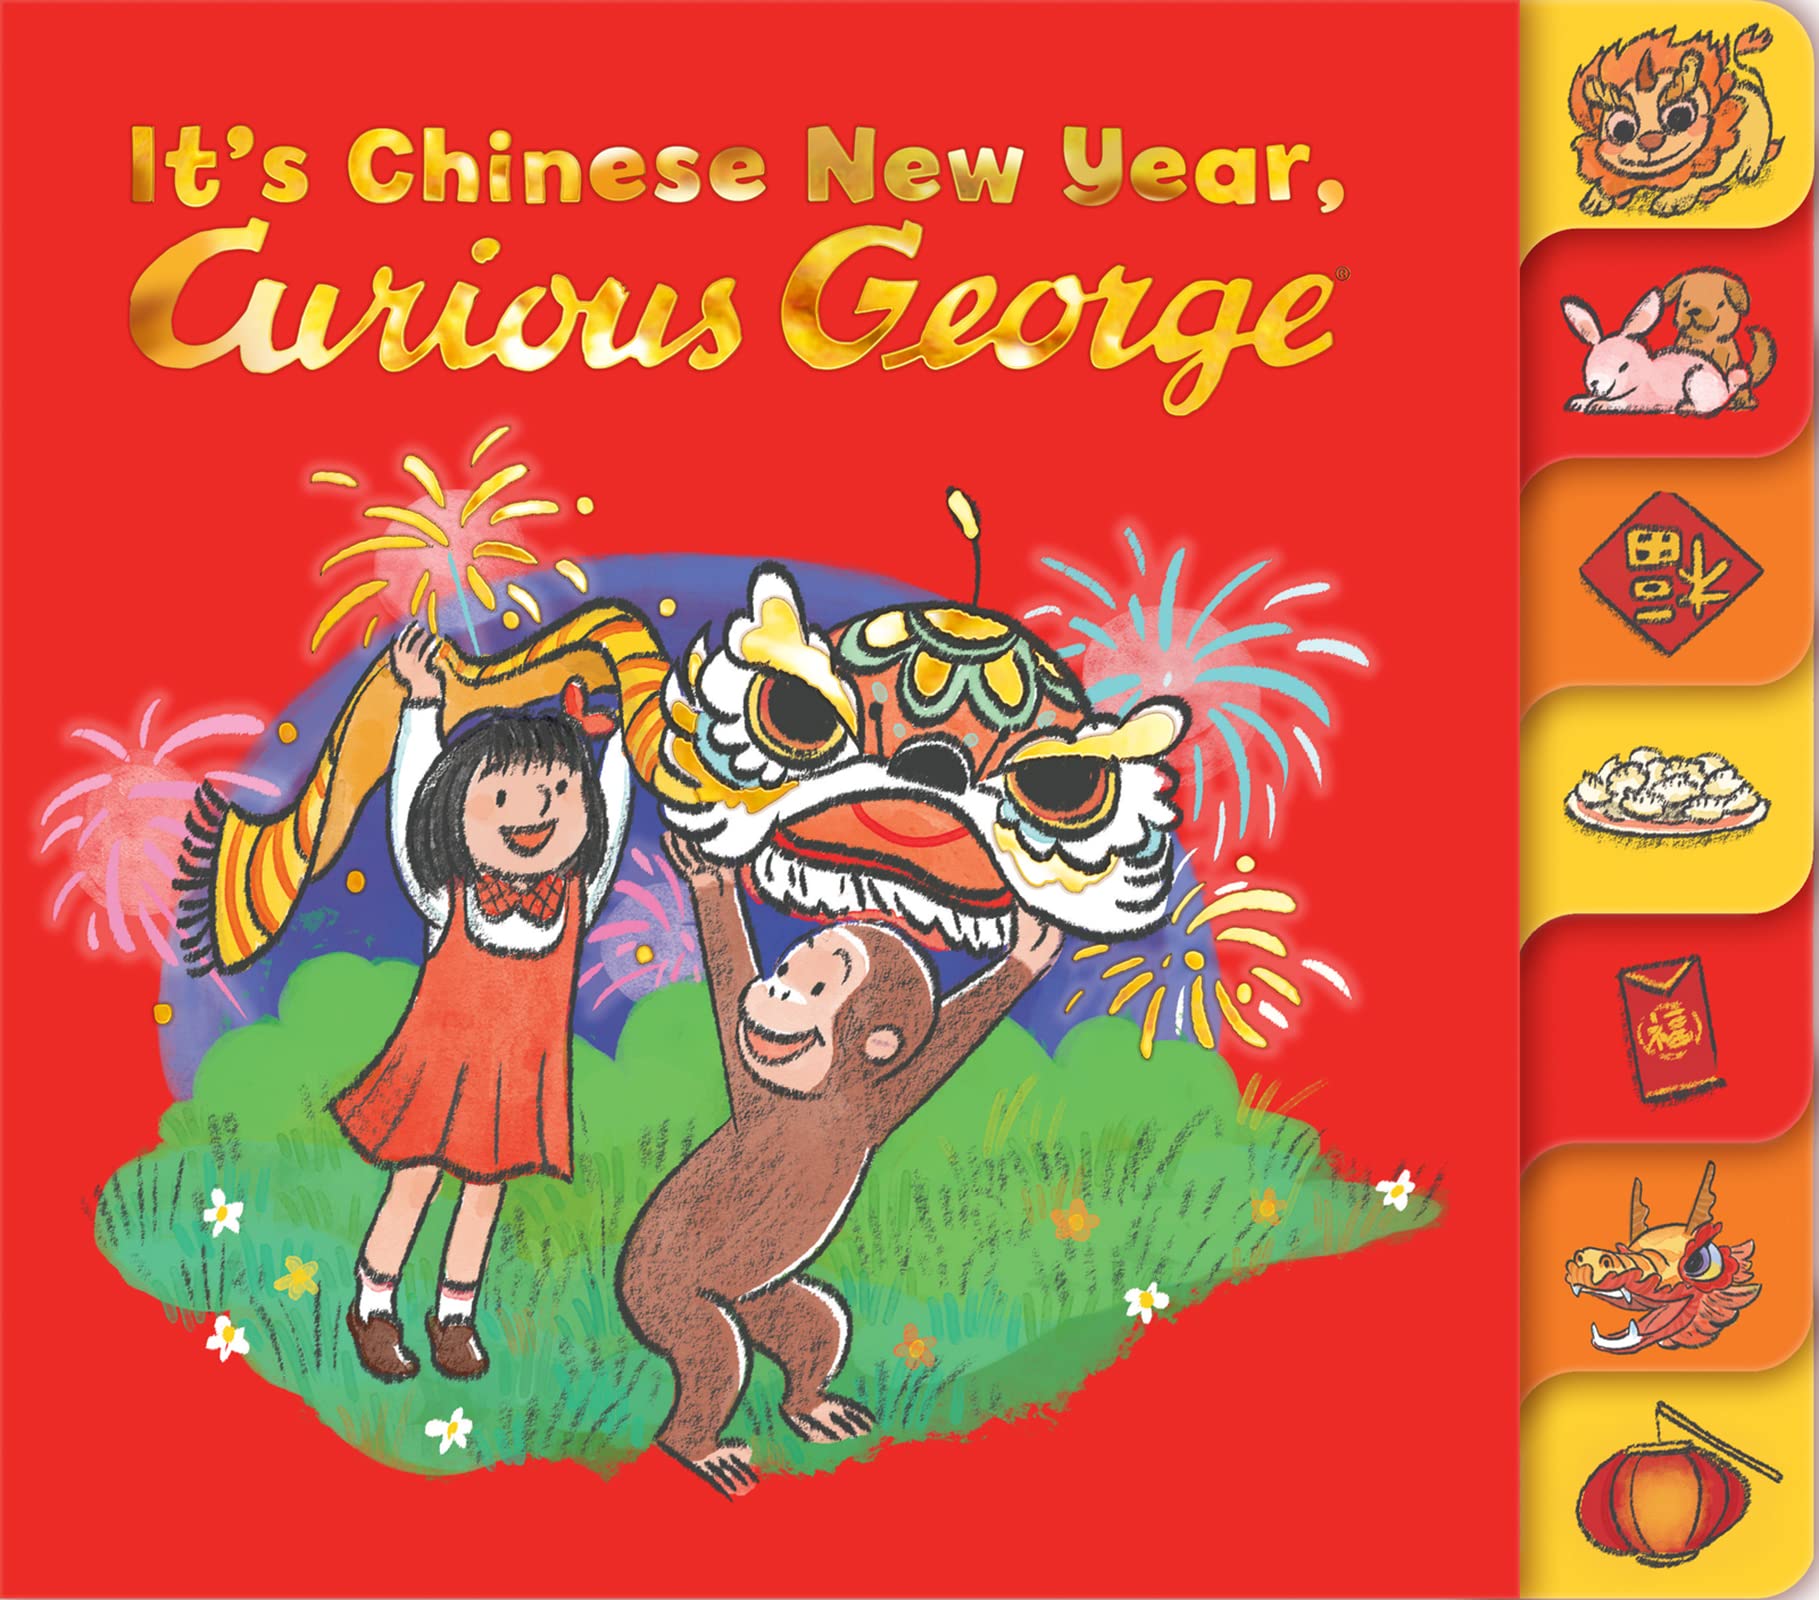 Cover of "It's Chinese New Year, Curious George."